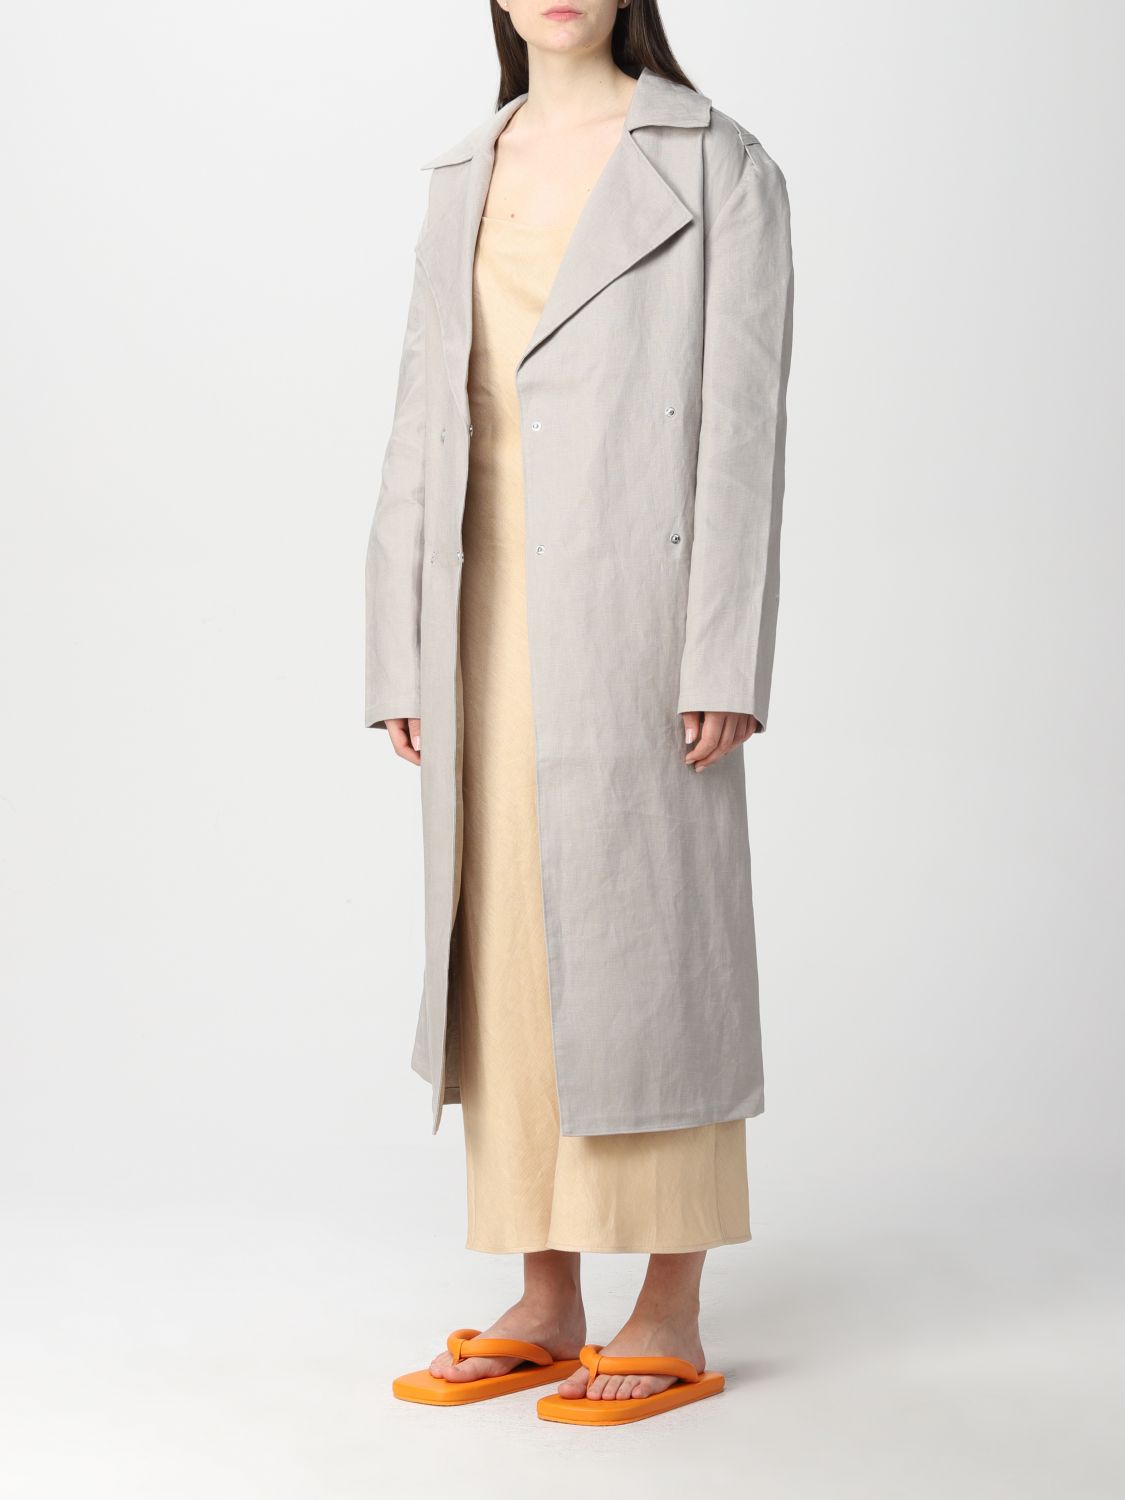 Trench Remain: Trench Remain donna beige 2